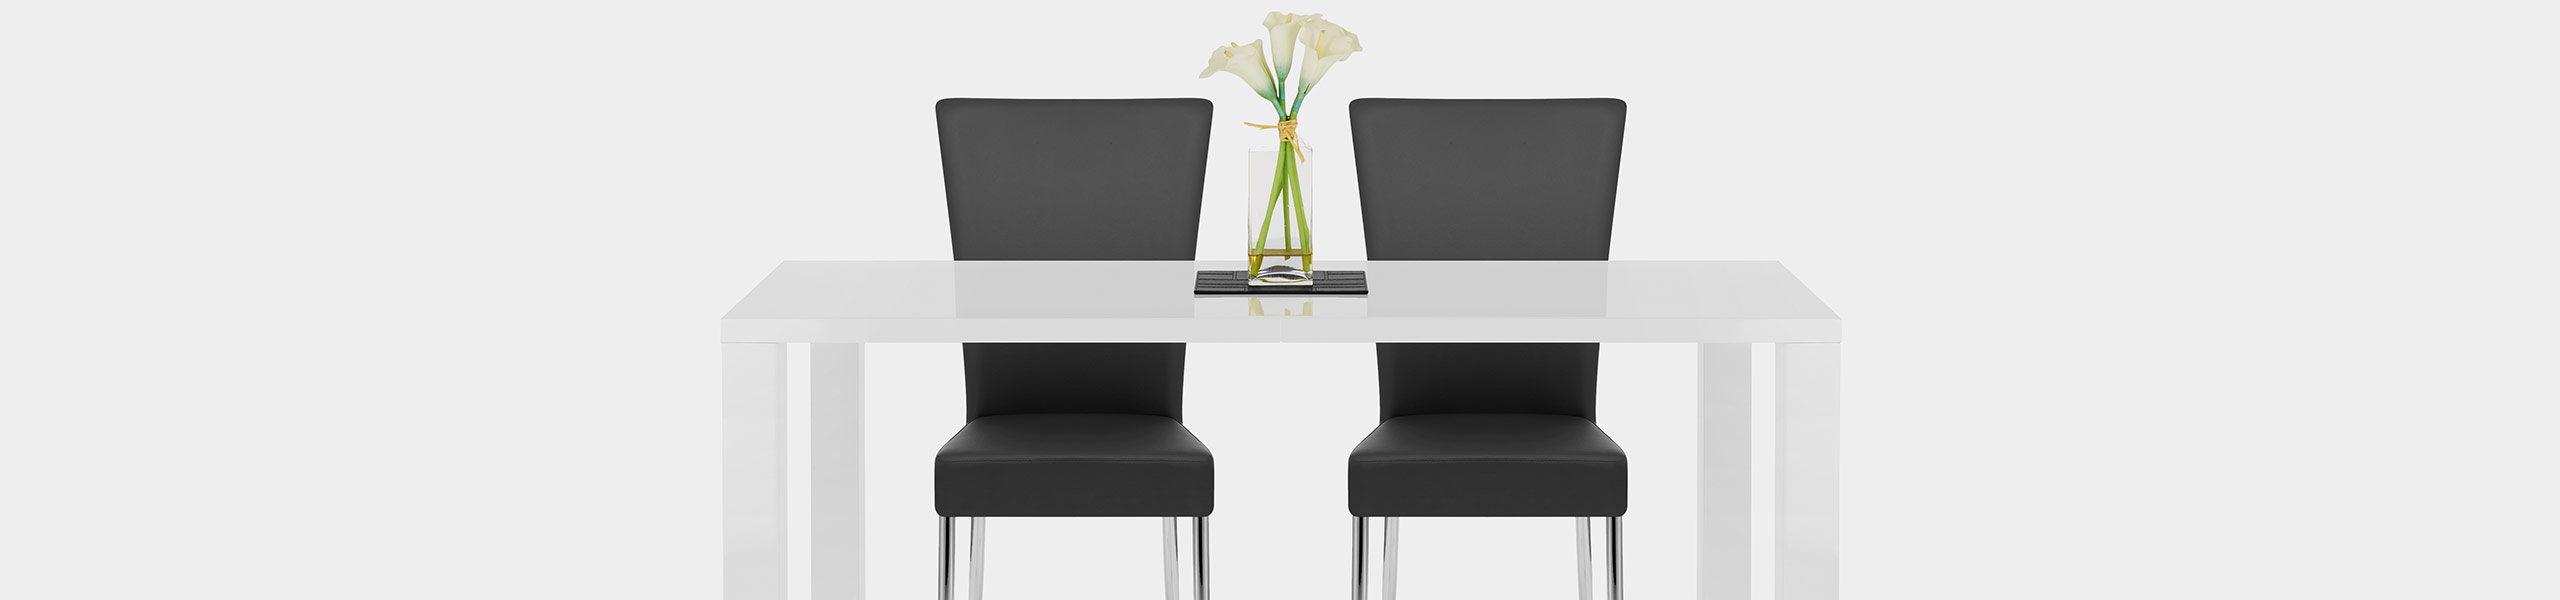 Picasso Dining Chair Black Video Banner